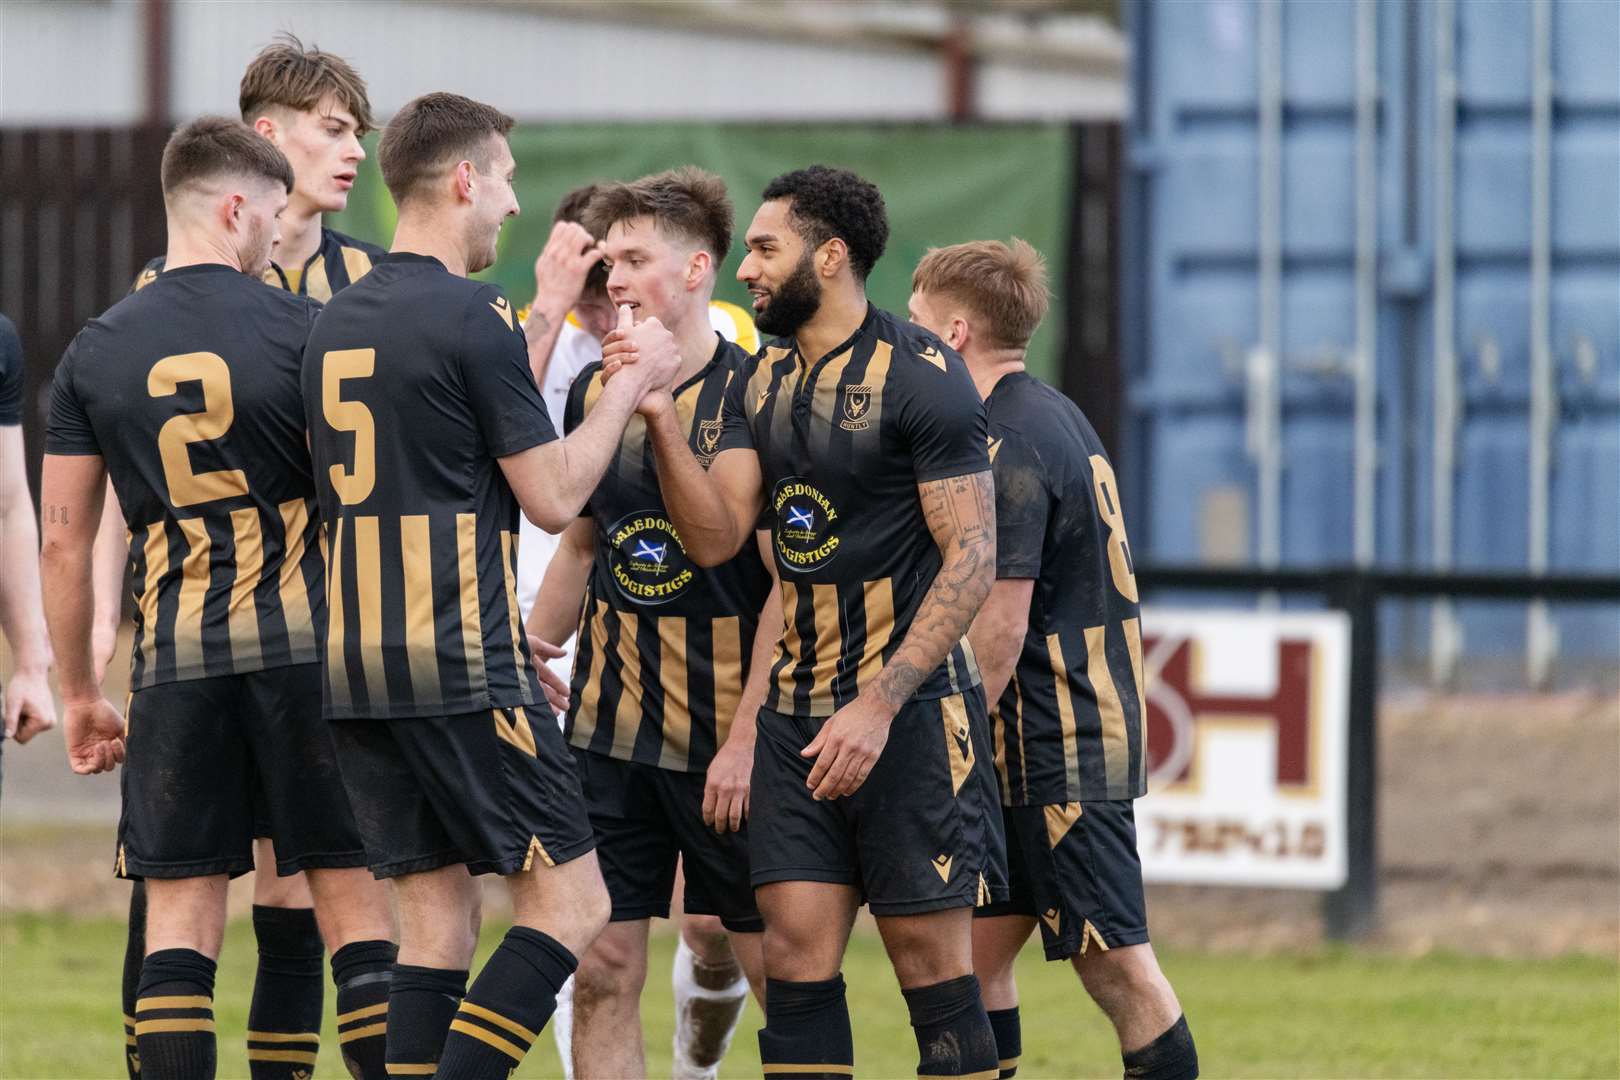 Huntly celebrates Robbie Foster's hat-trick. ..Huntly F.C. (3) v Forres Mechanics F.C. (0) at Christie Park, Huntly - Highland Football League 23/24. ..Picture: Beth Taylor.